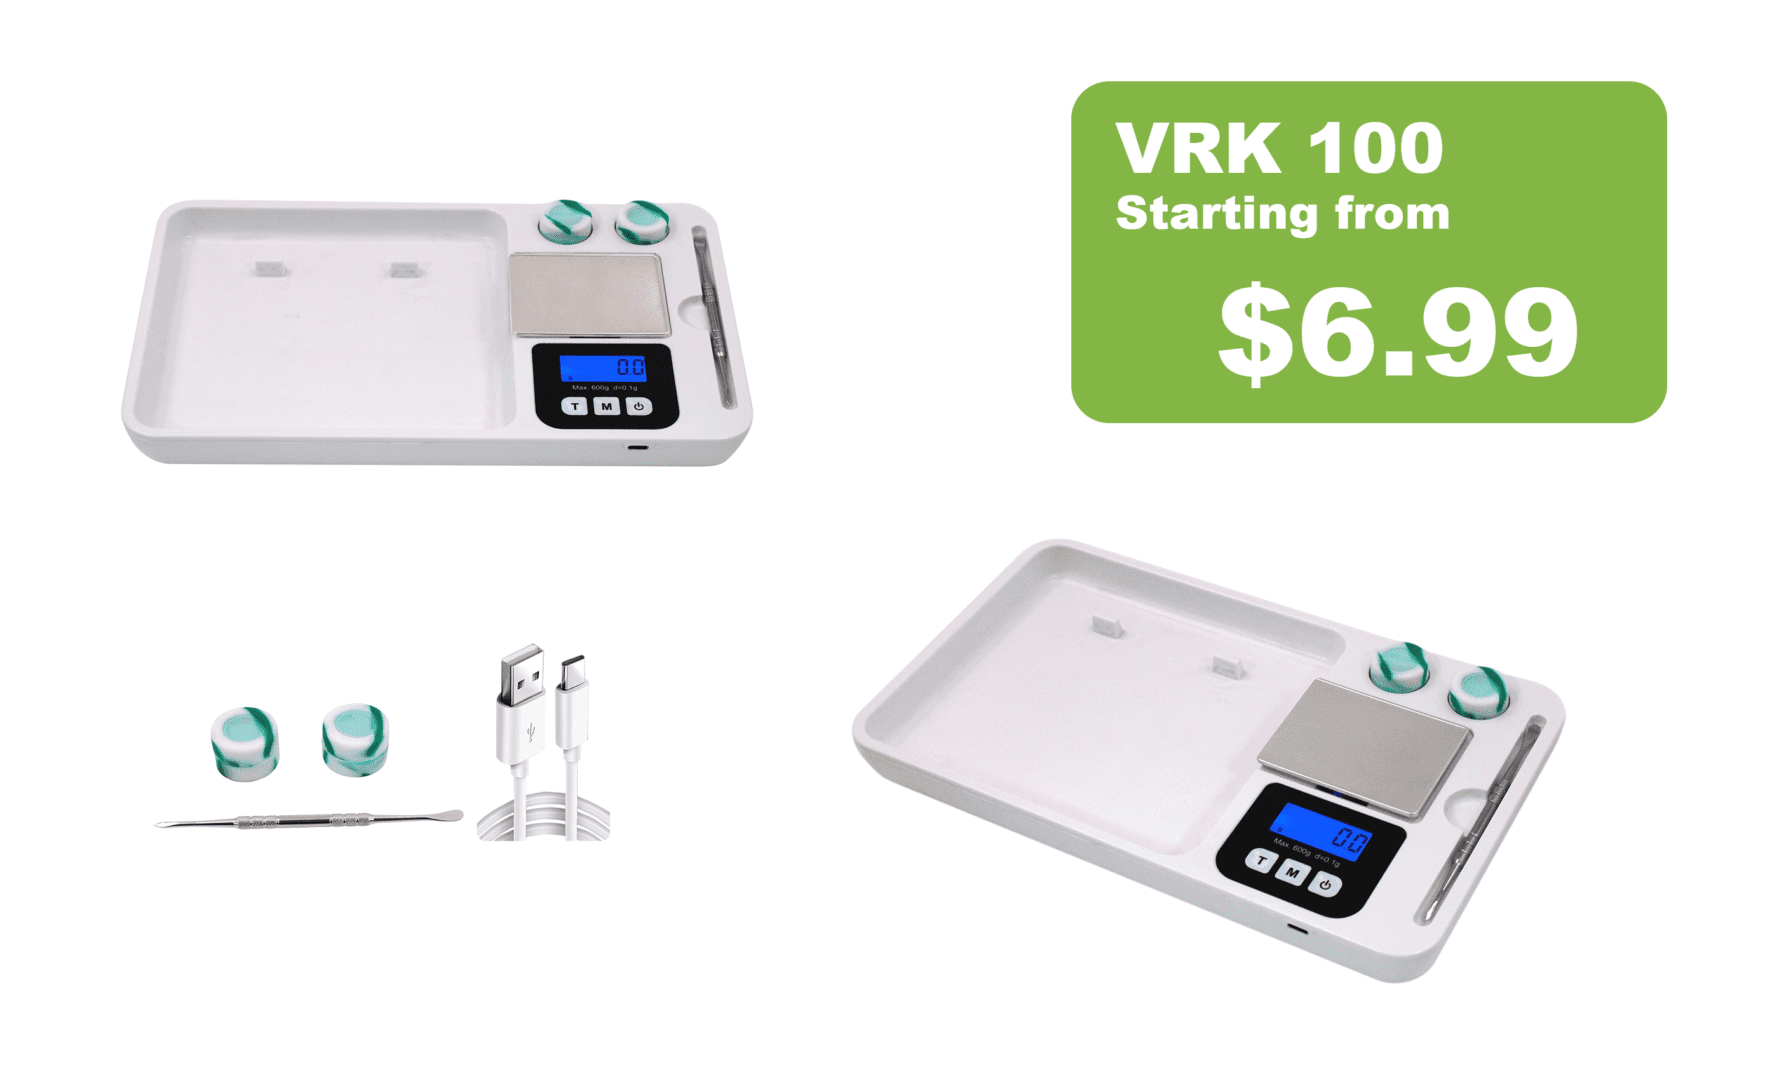 Vrk 100 High-Quality Scales starting from $ 99.